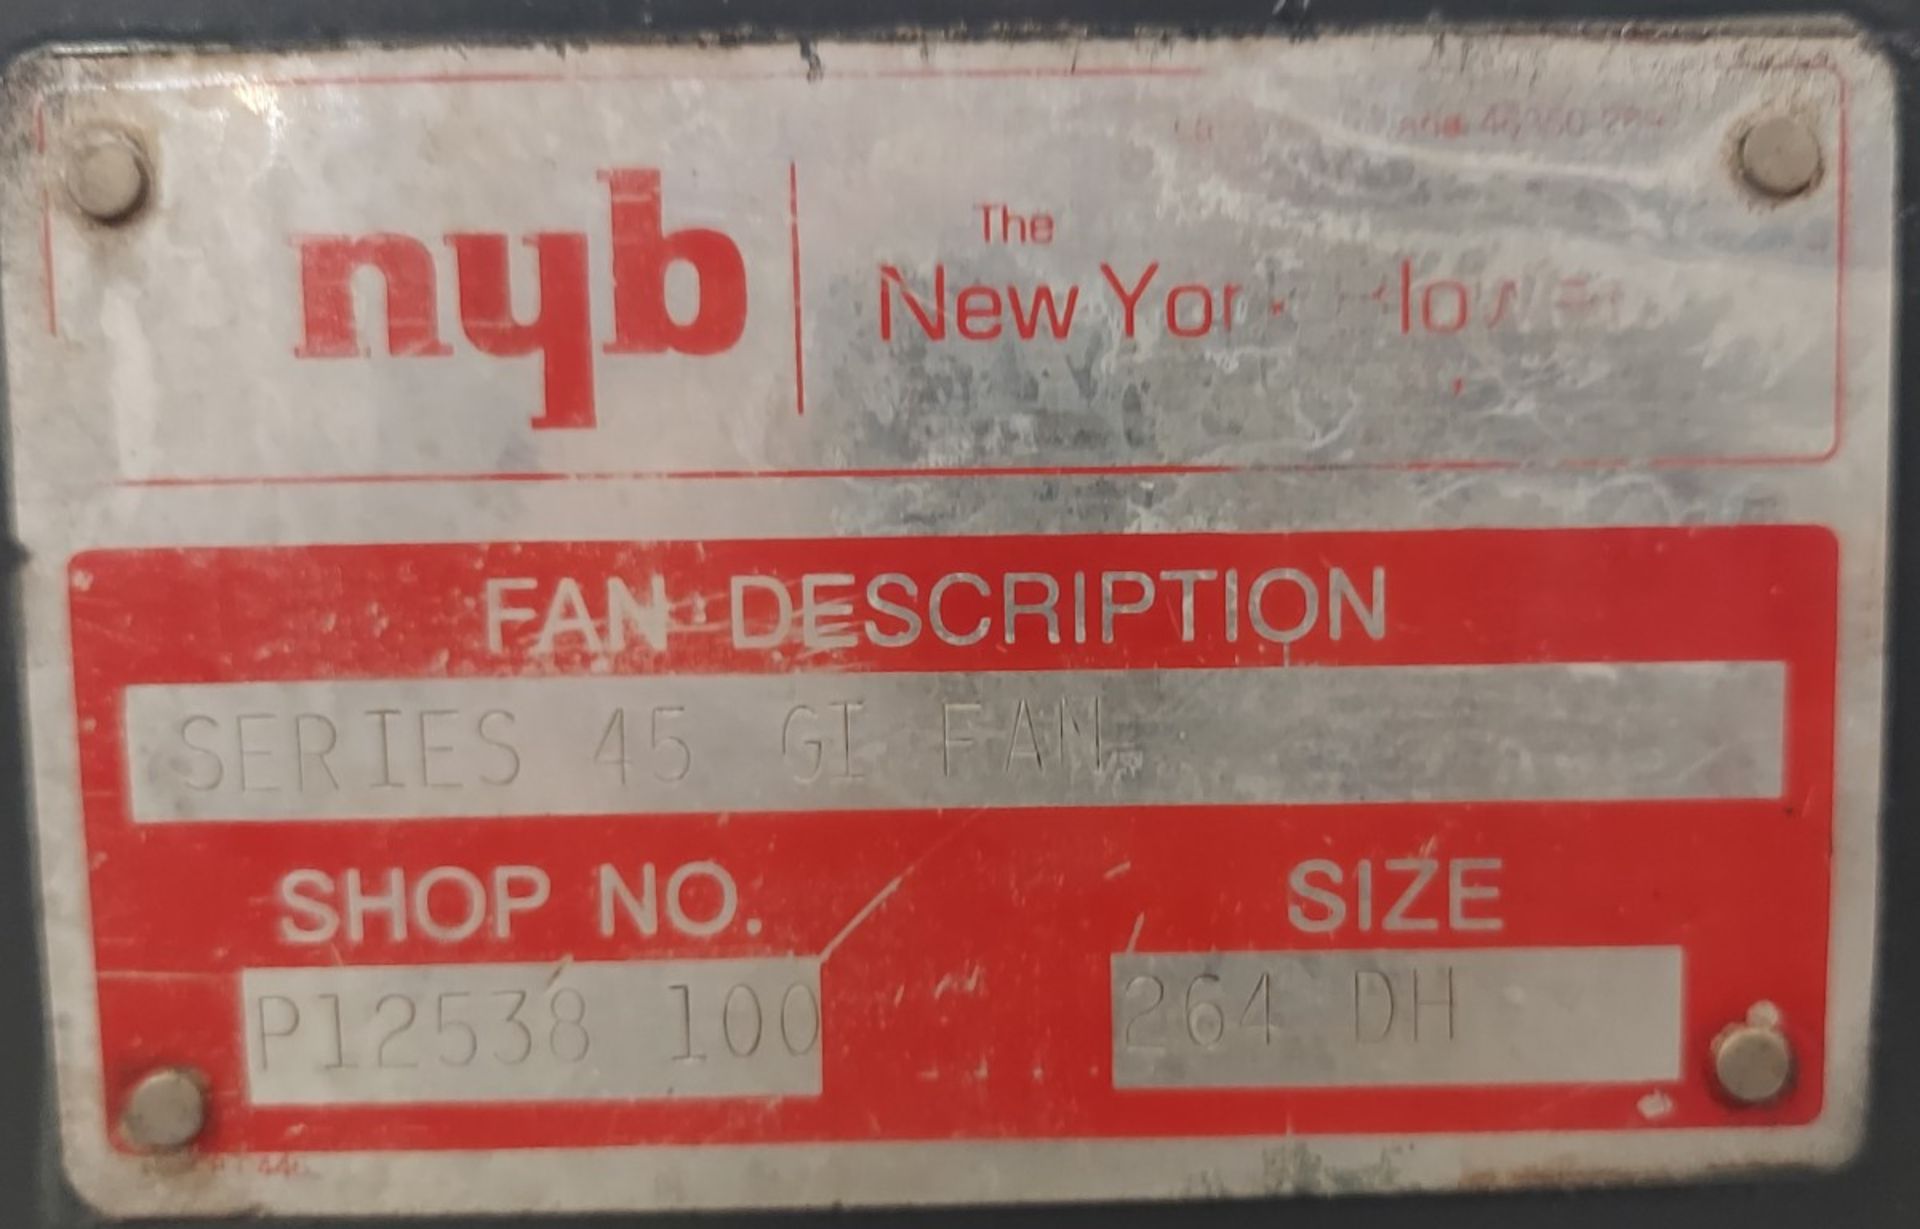 SIZE 264 DH NEW YORK BLOWER. SHOP NUMBER P12538-100. NEW SURPLUS - Image 6 of 8